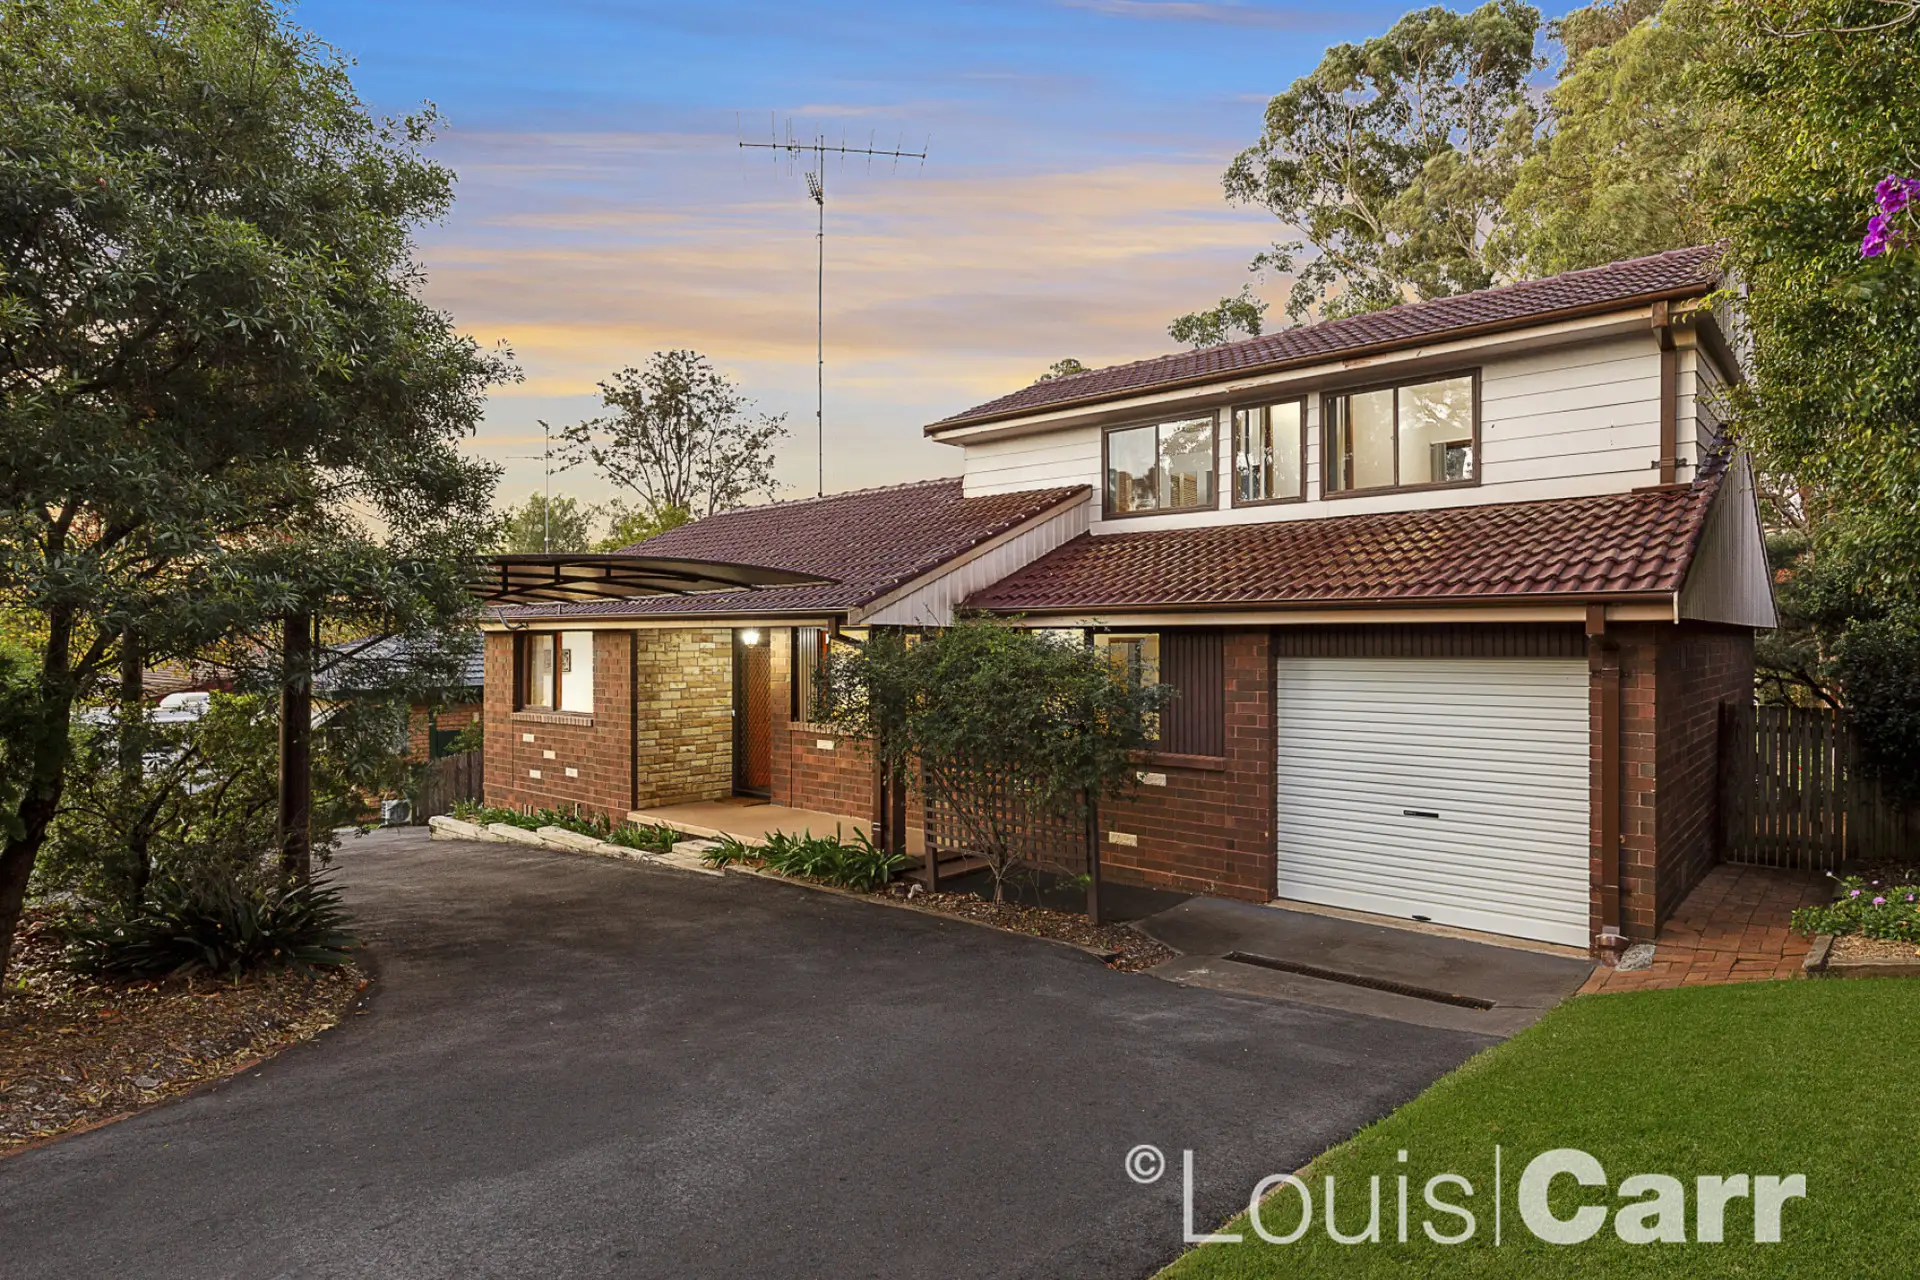 Photo #1: 13 Benwerrin Avenue, Baulkham Hills - Sold by Louis Carr Real Estate